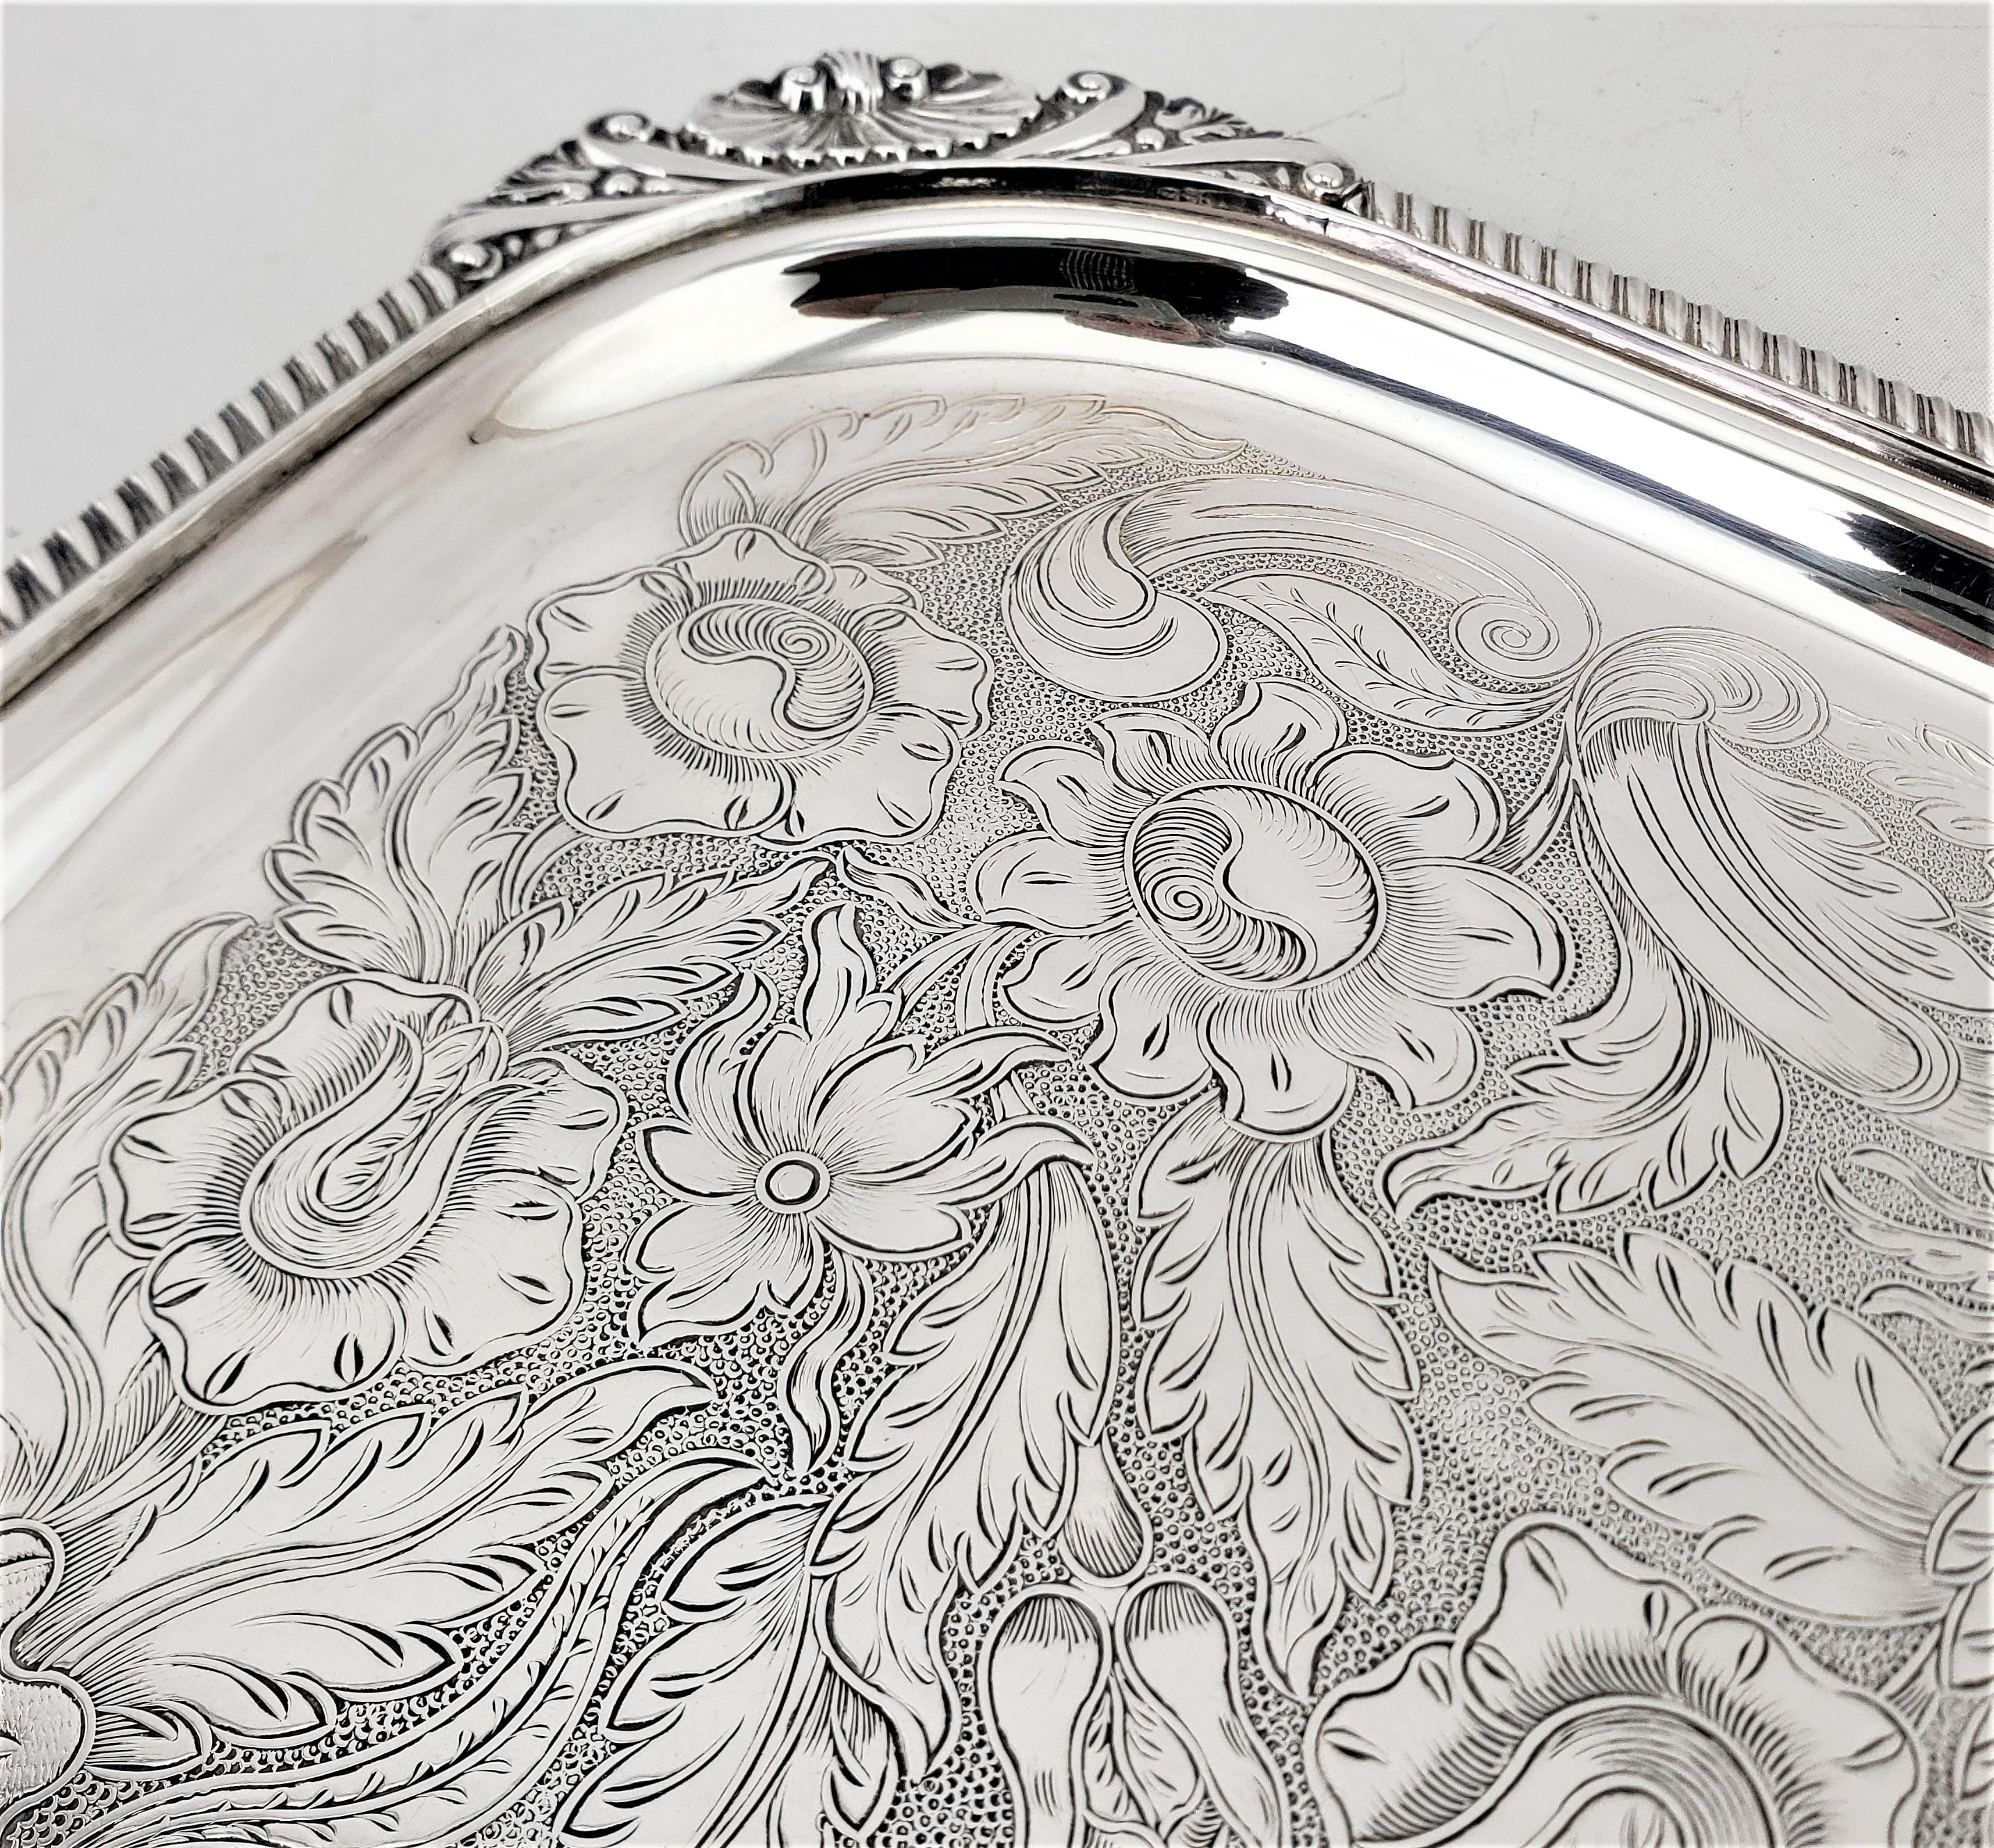 Antique Birks Large Silver Plated Rectangular Serving Tray with Floral Engraving For Sale 2